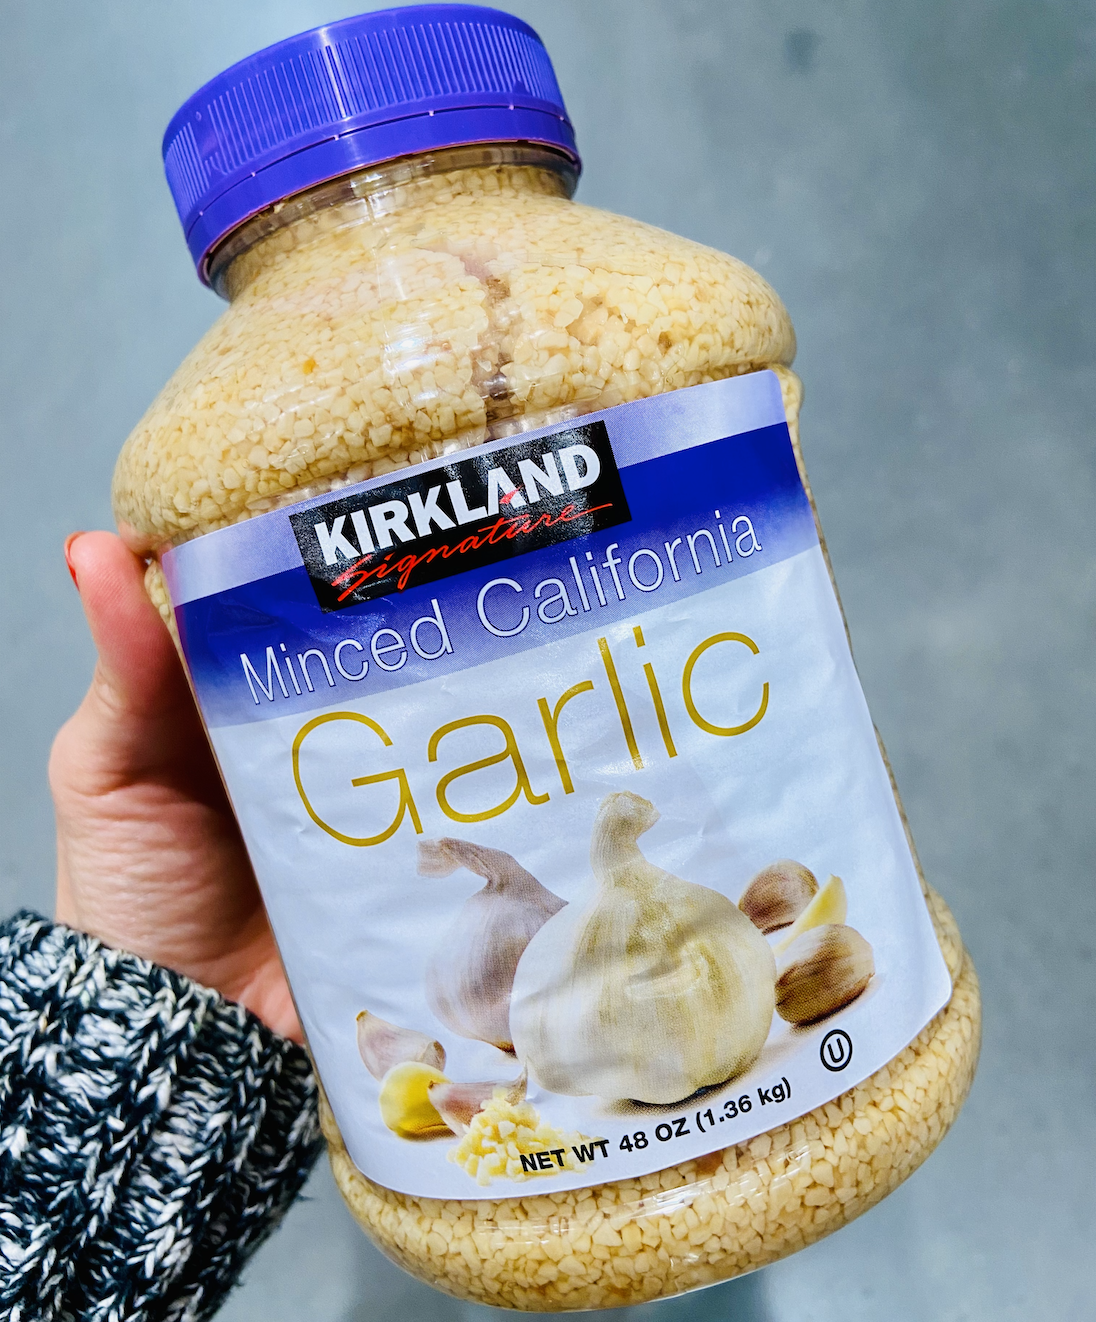 Hand holding a large container of minced garlic from costco